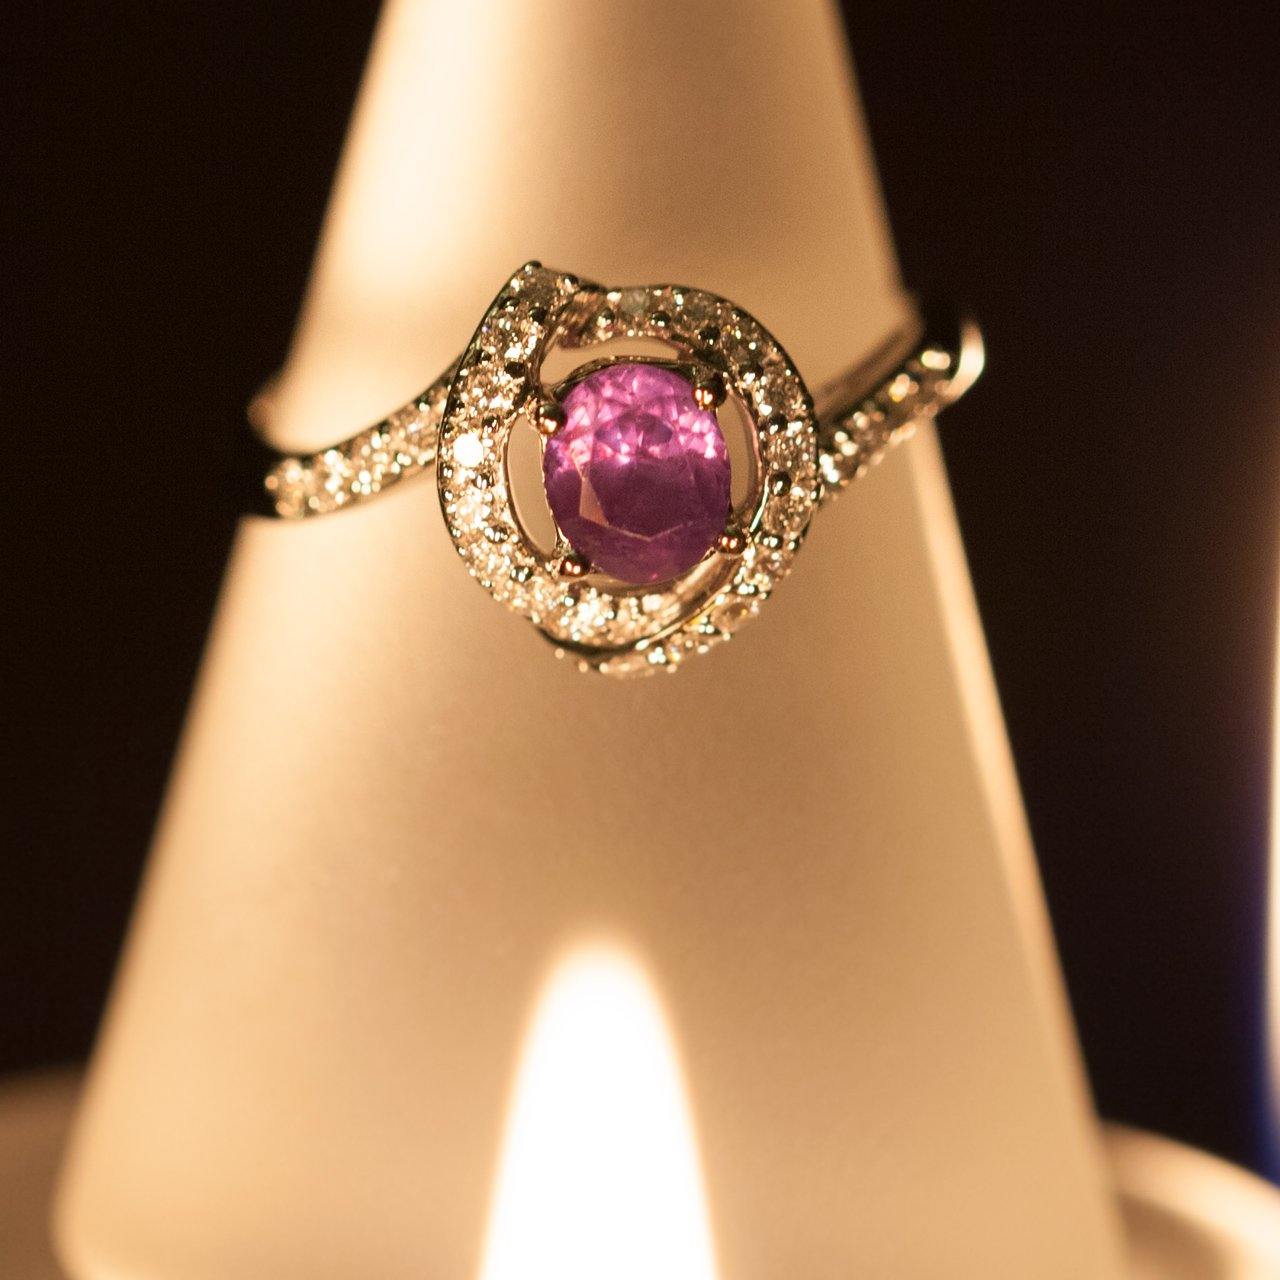 An 18k gold ring with a 1.14ctw natural alexandrite stone and diamond accents displayed on a surface